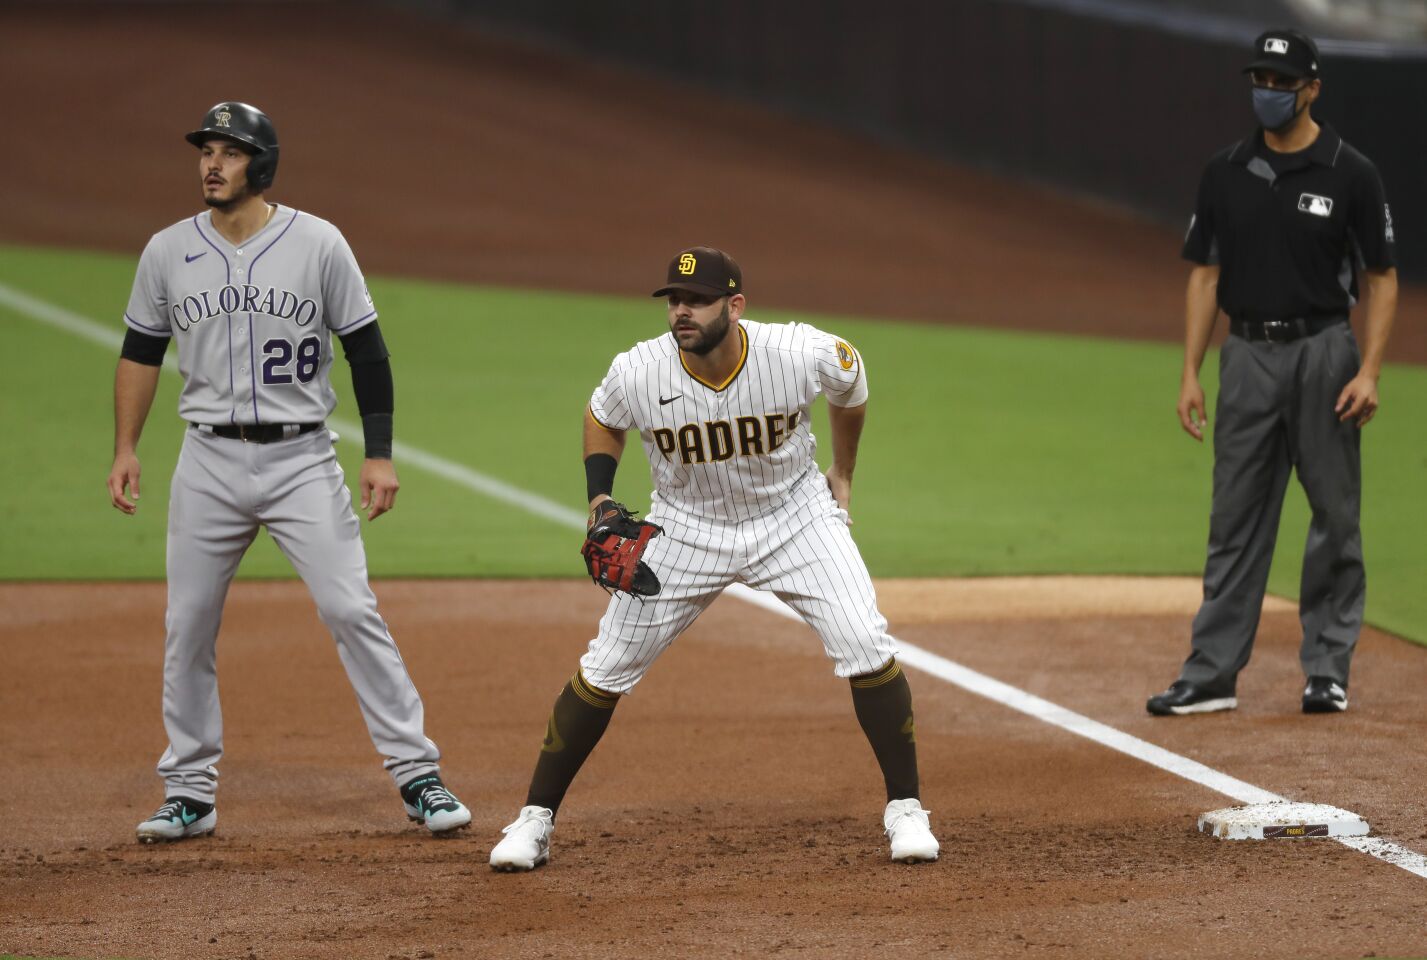 San Diego Padres first baseman Mitch Moreland took over for an injured Eric Hosmer against the Colorado Rockies.